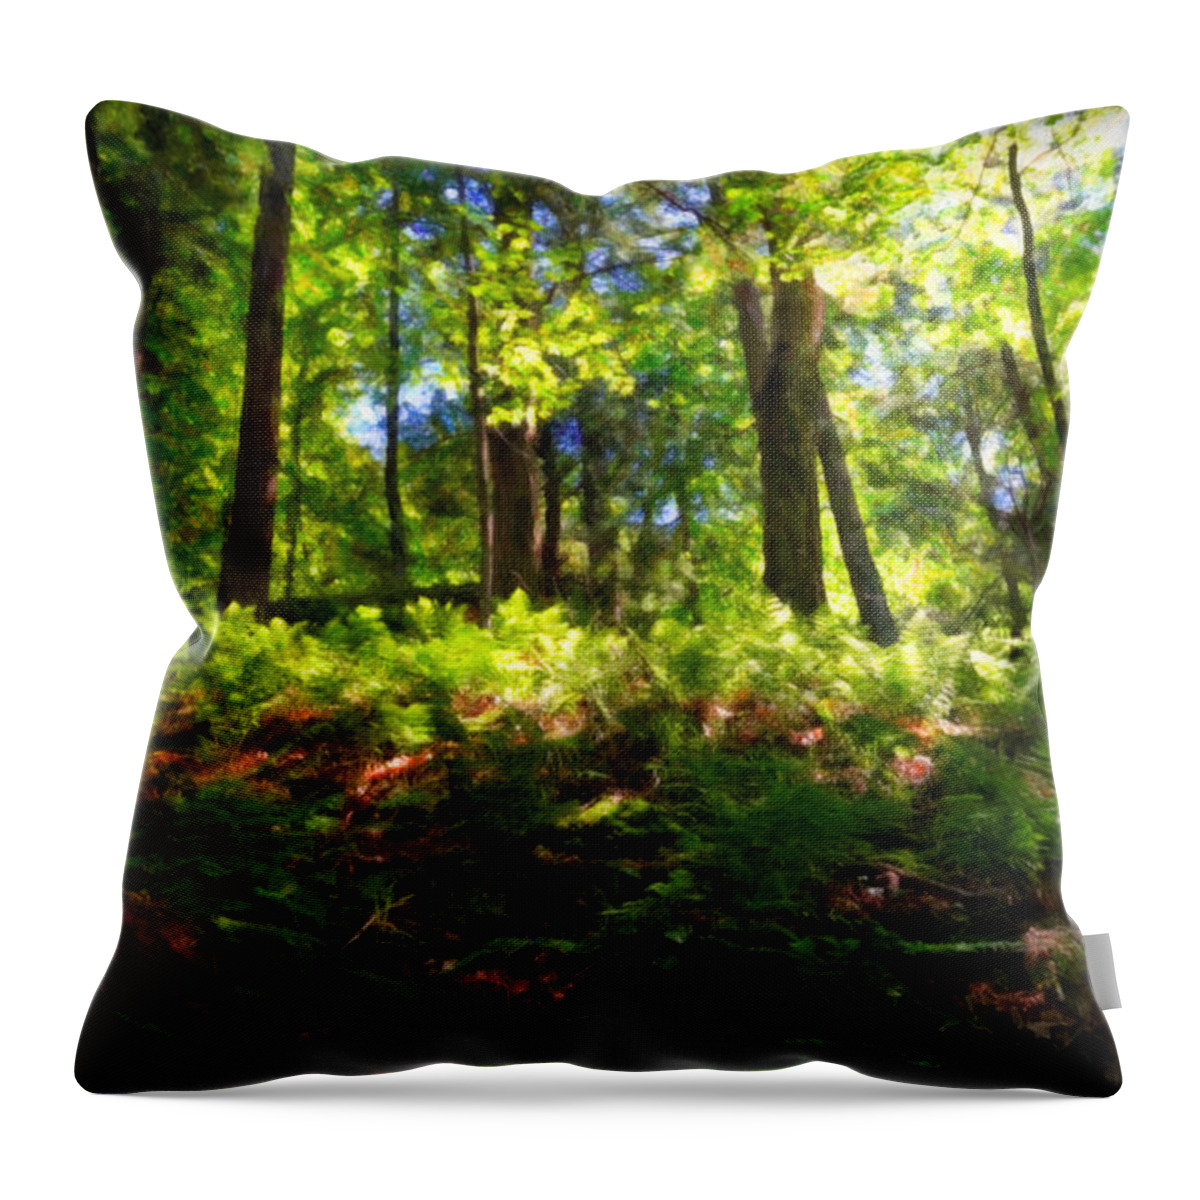 Wisconsin Throw Pillow featuring the painting Woodland by Lars Lentz